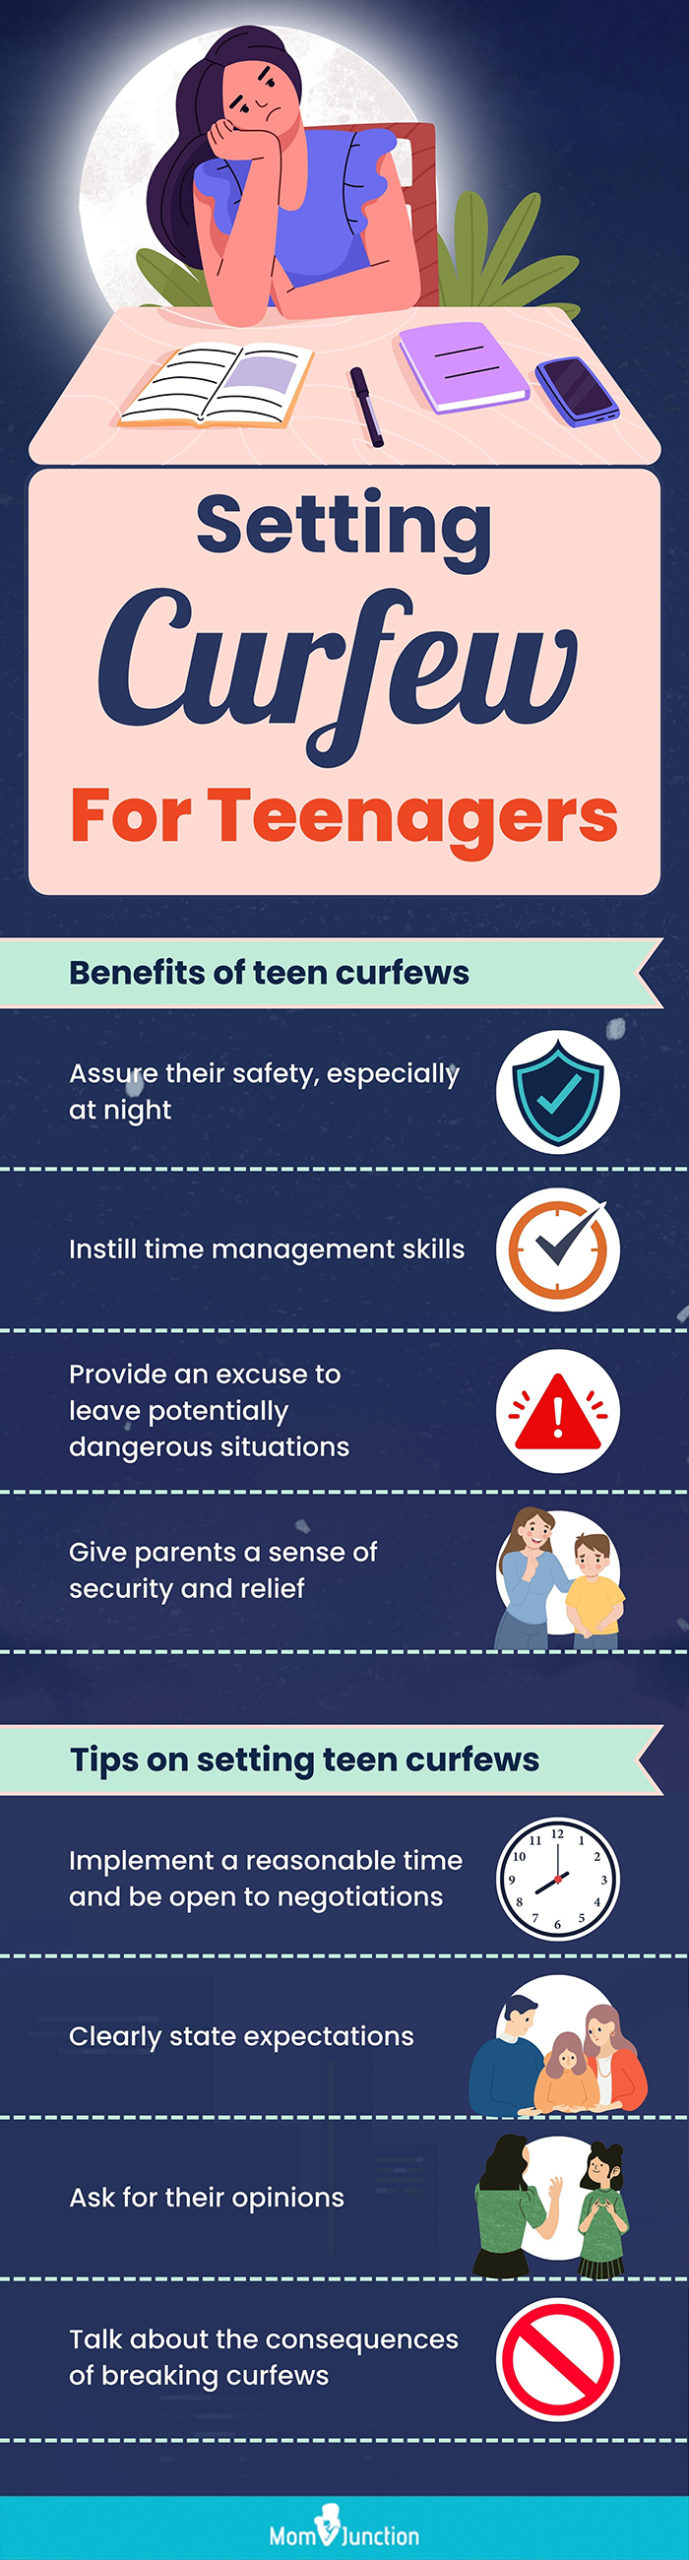 setting curfew for teenagers(infographic)